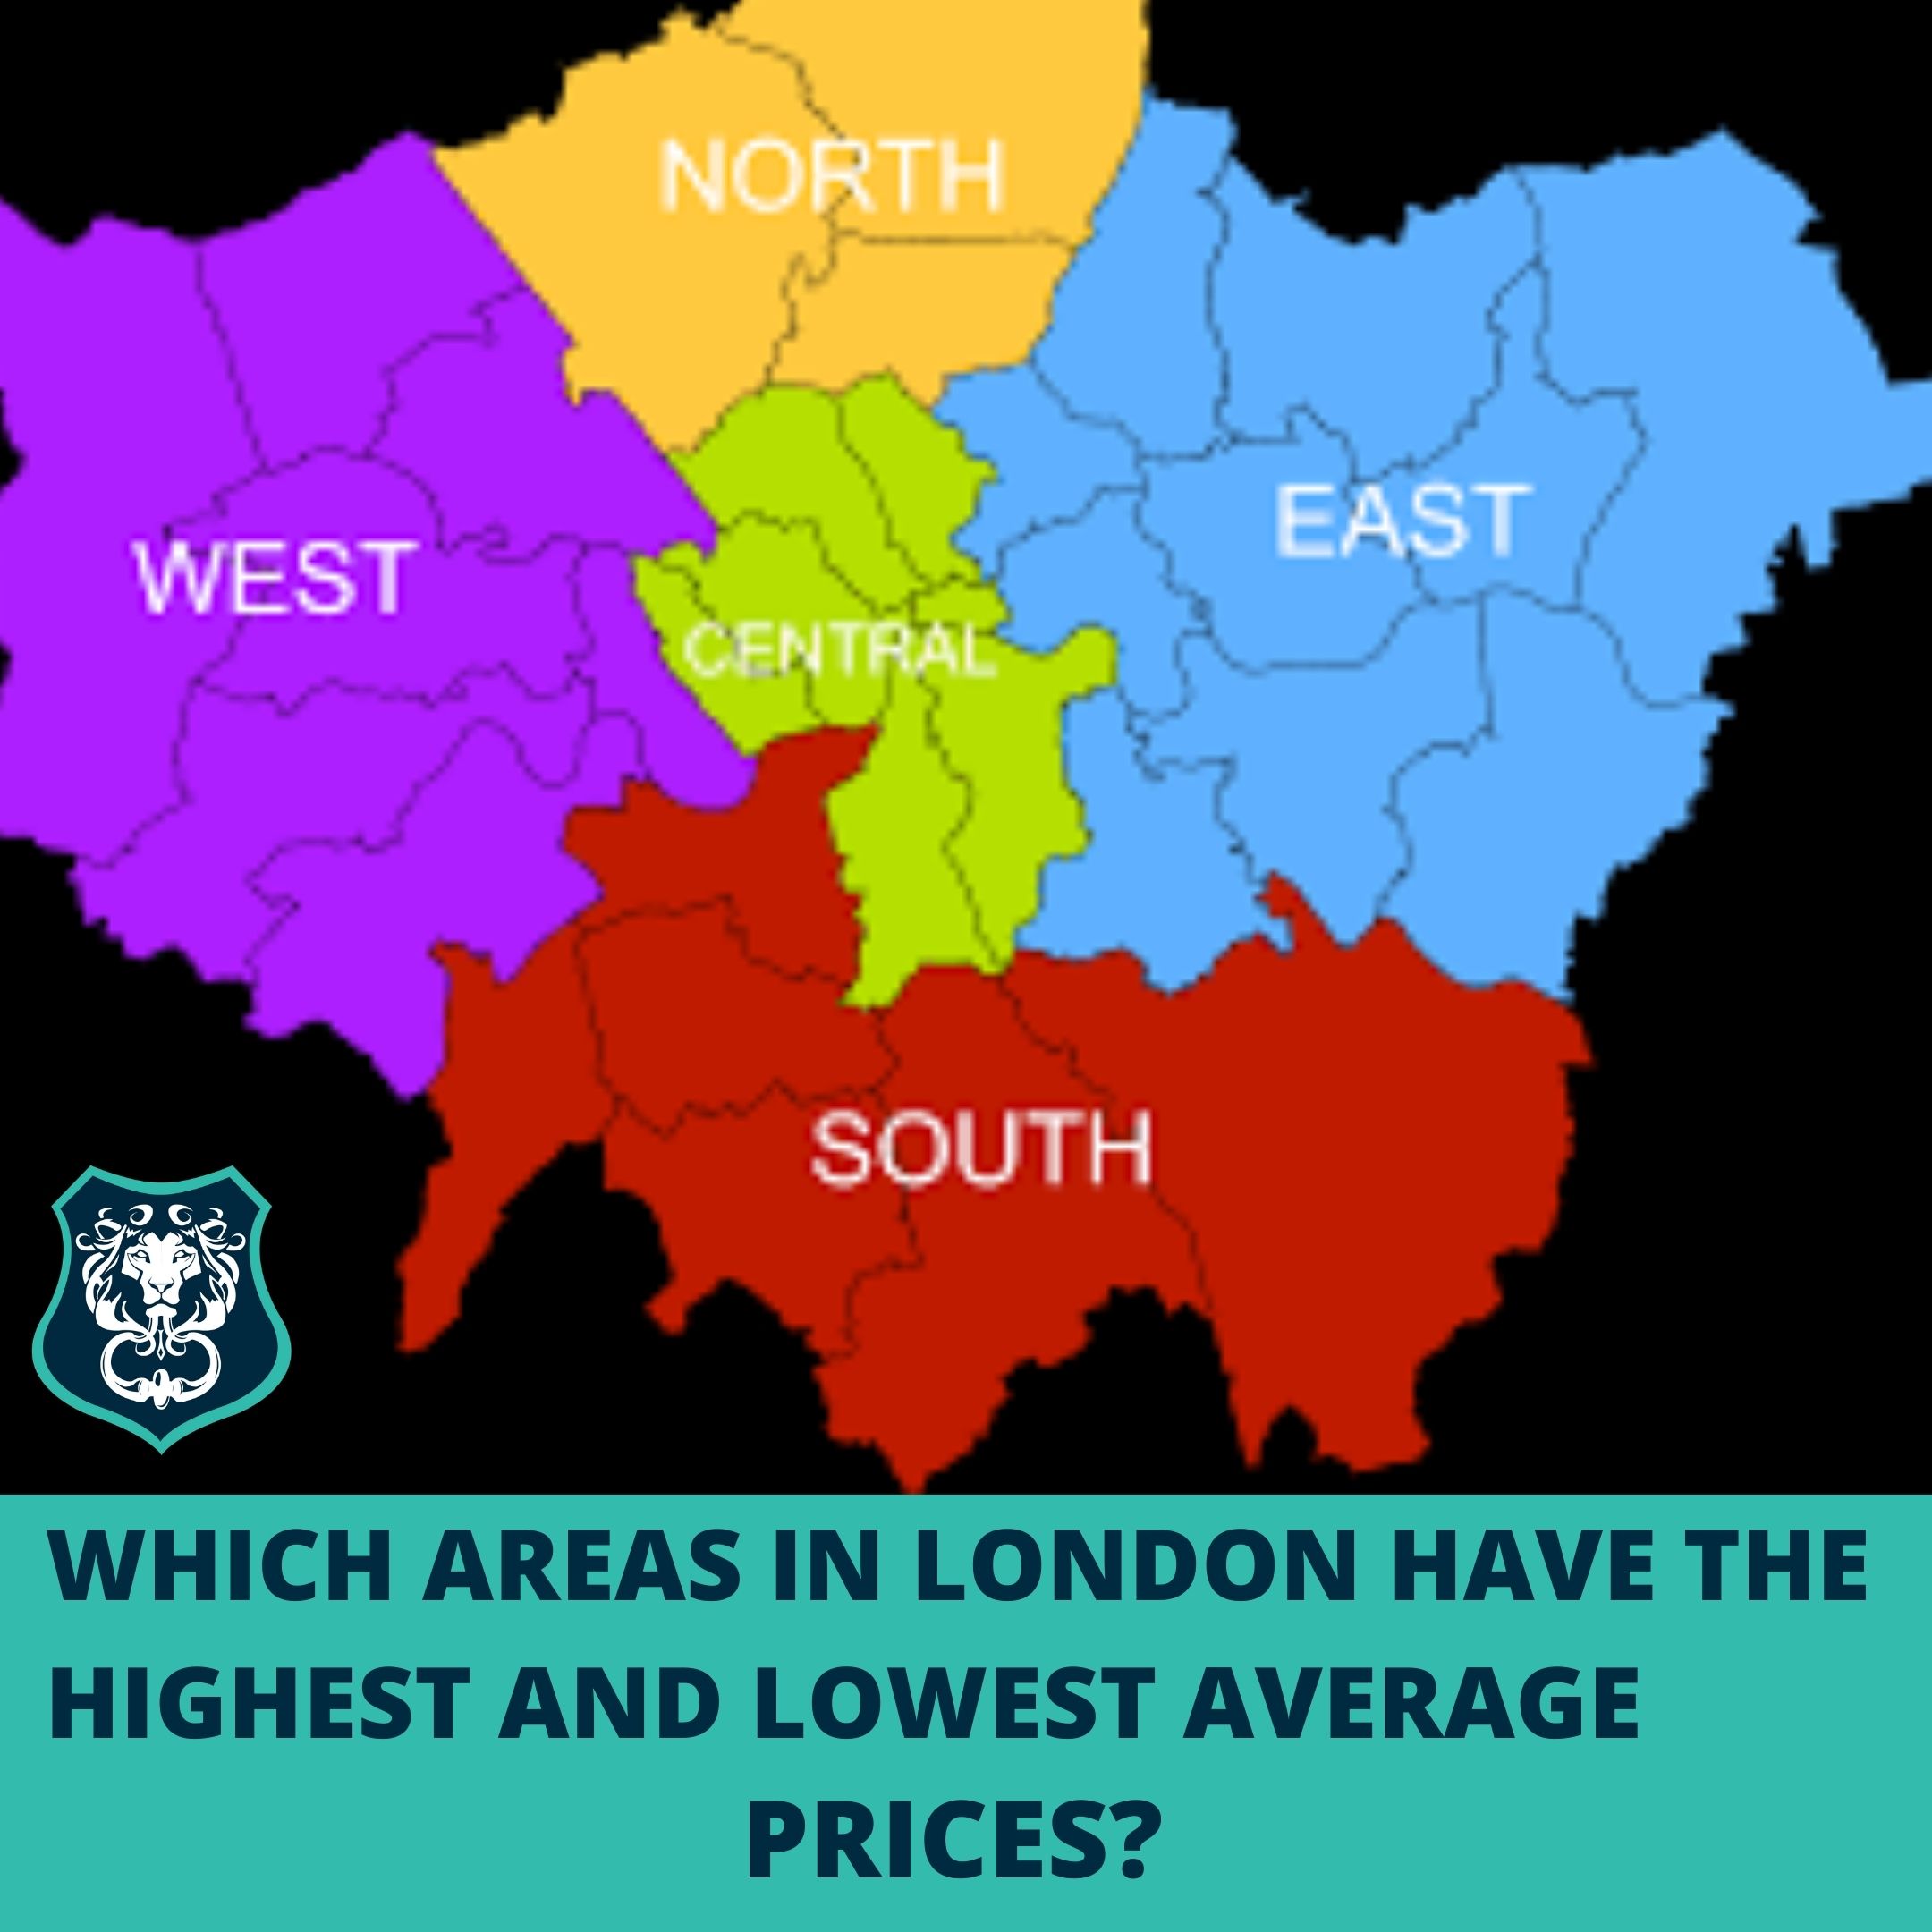 WHICH AREAS IN LONDON HAVE THE HIGHEST AND LOWEST AVERAGE PRICES?